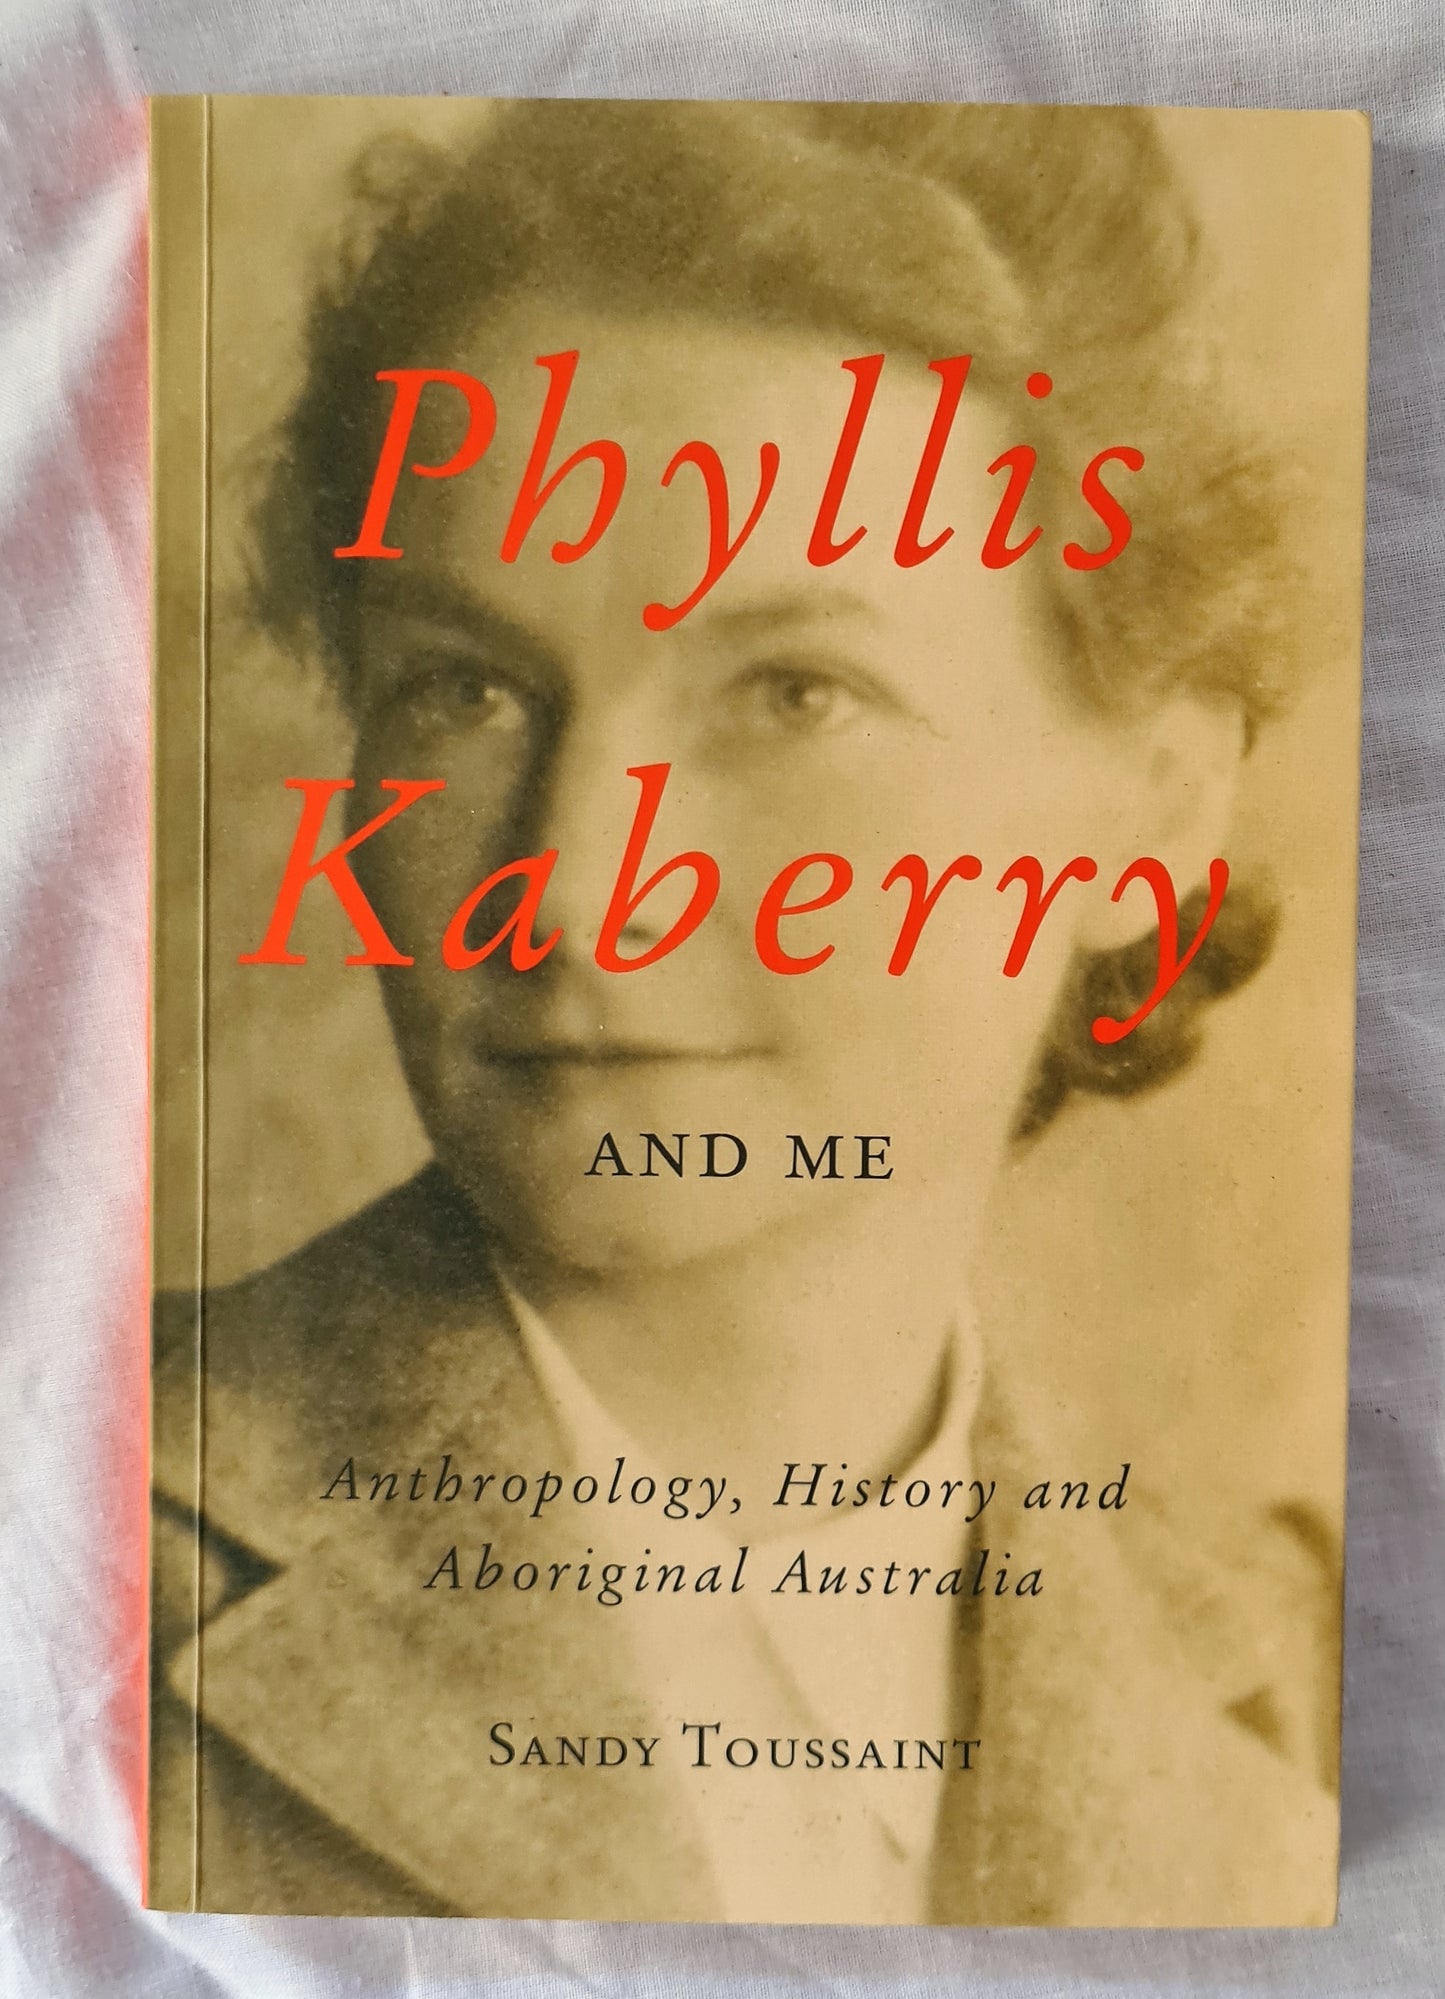 Phyllis Kaberry and Me  Anthropology, History and Aboriginal Australia  by Sandy Toussaint